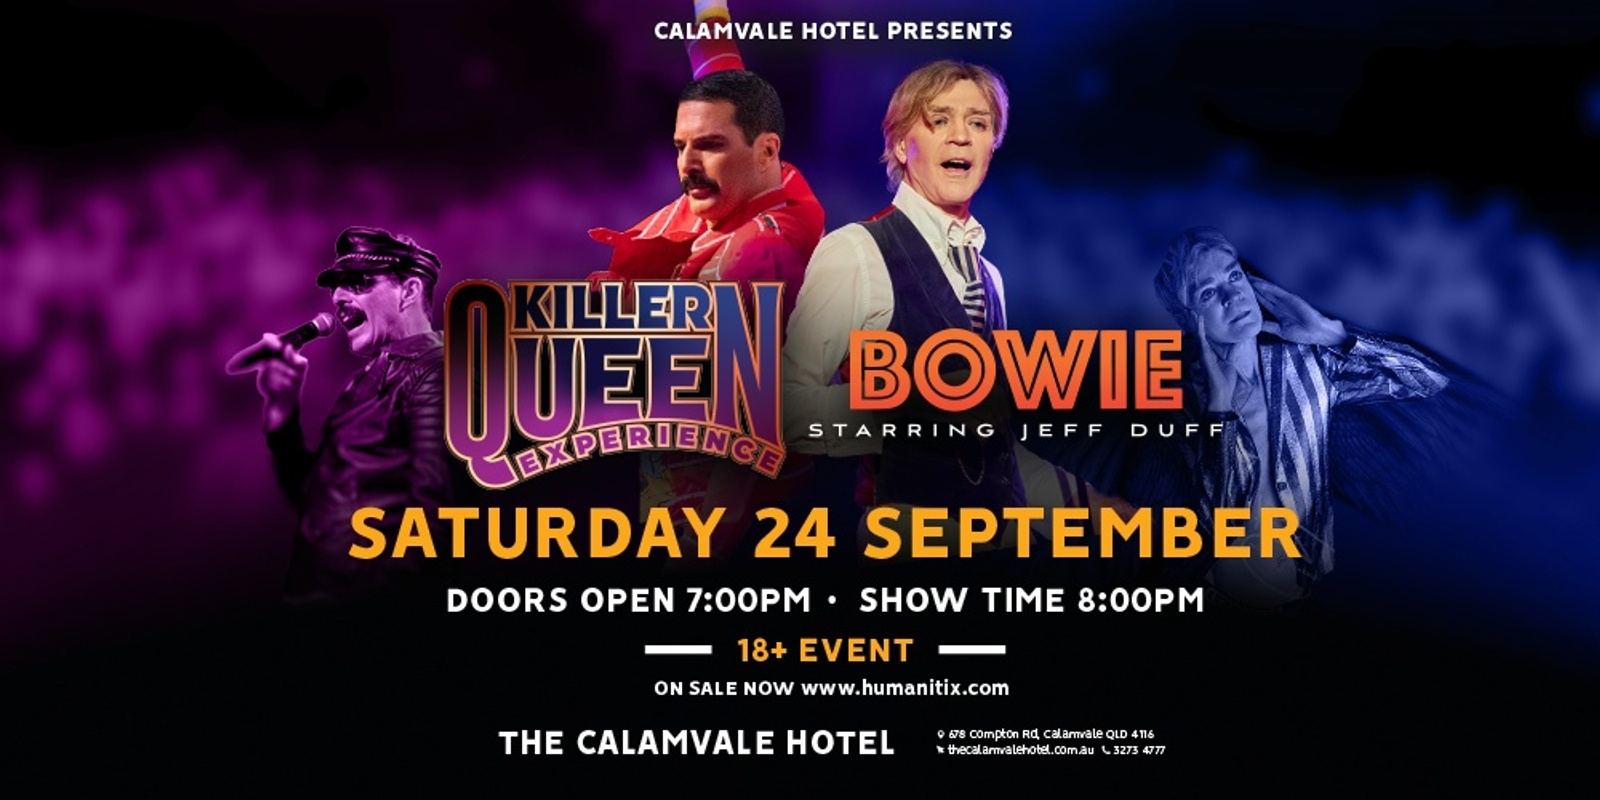 Banner image for Killer Queen Experience and Bowie at the Calamvale Hotel